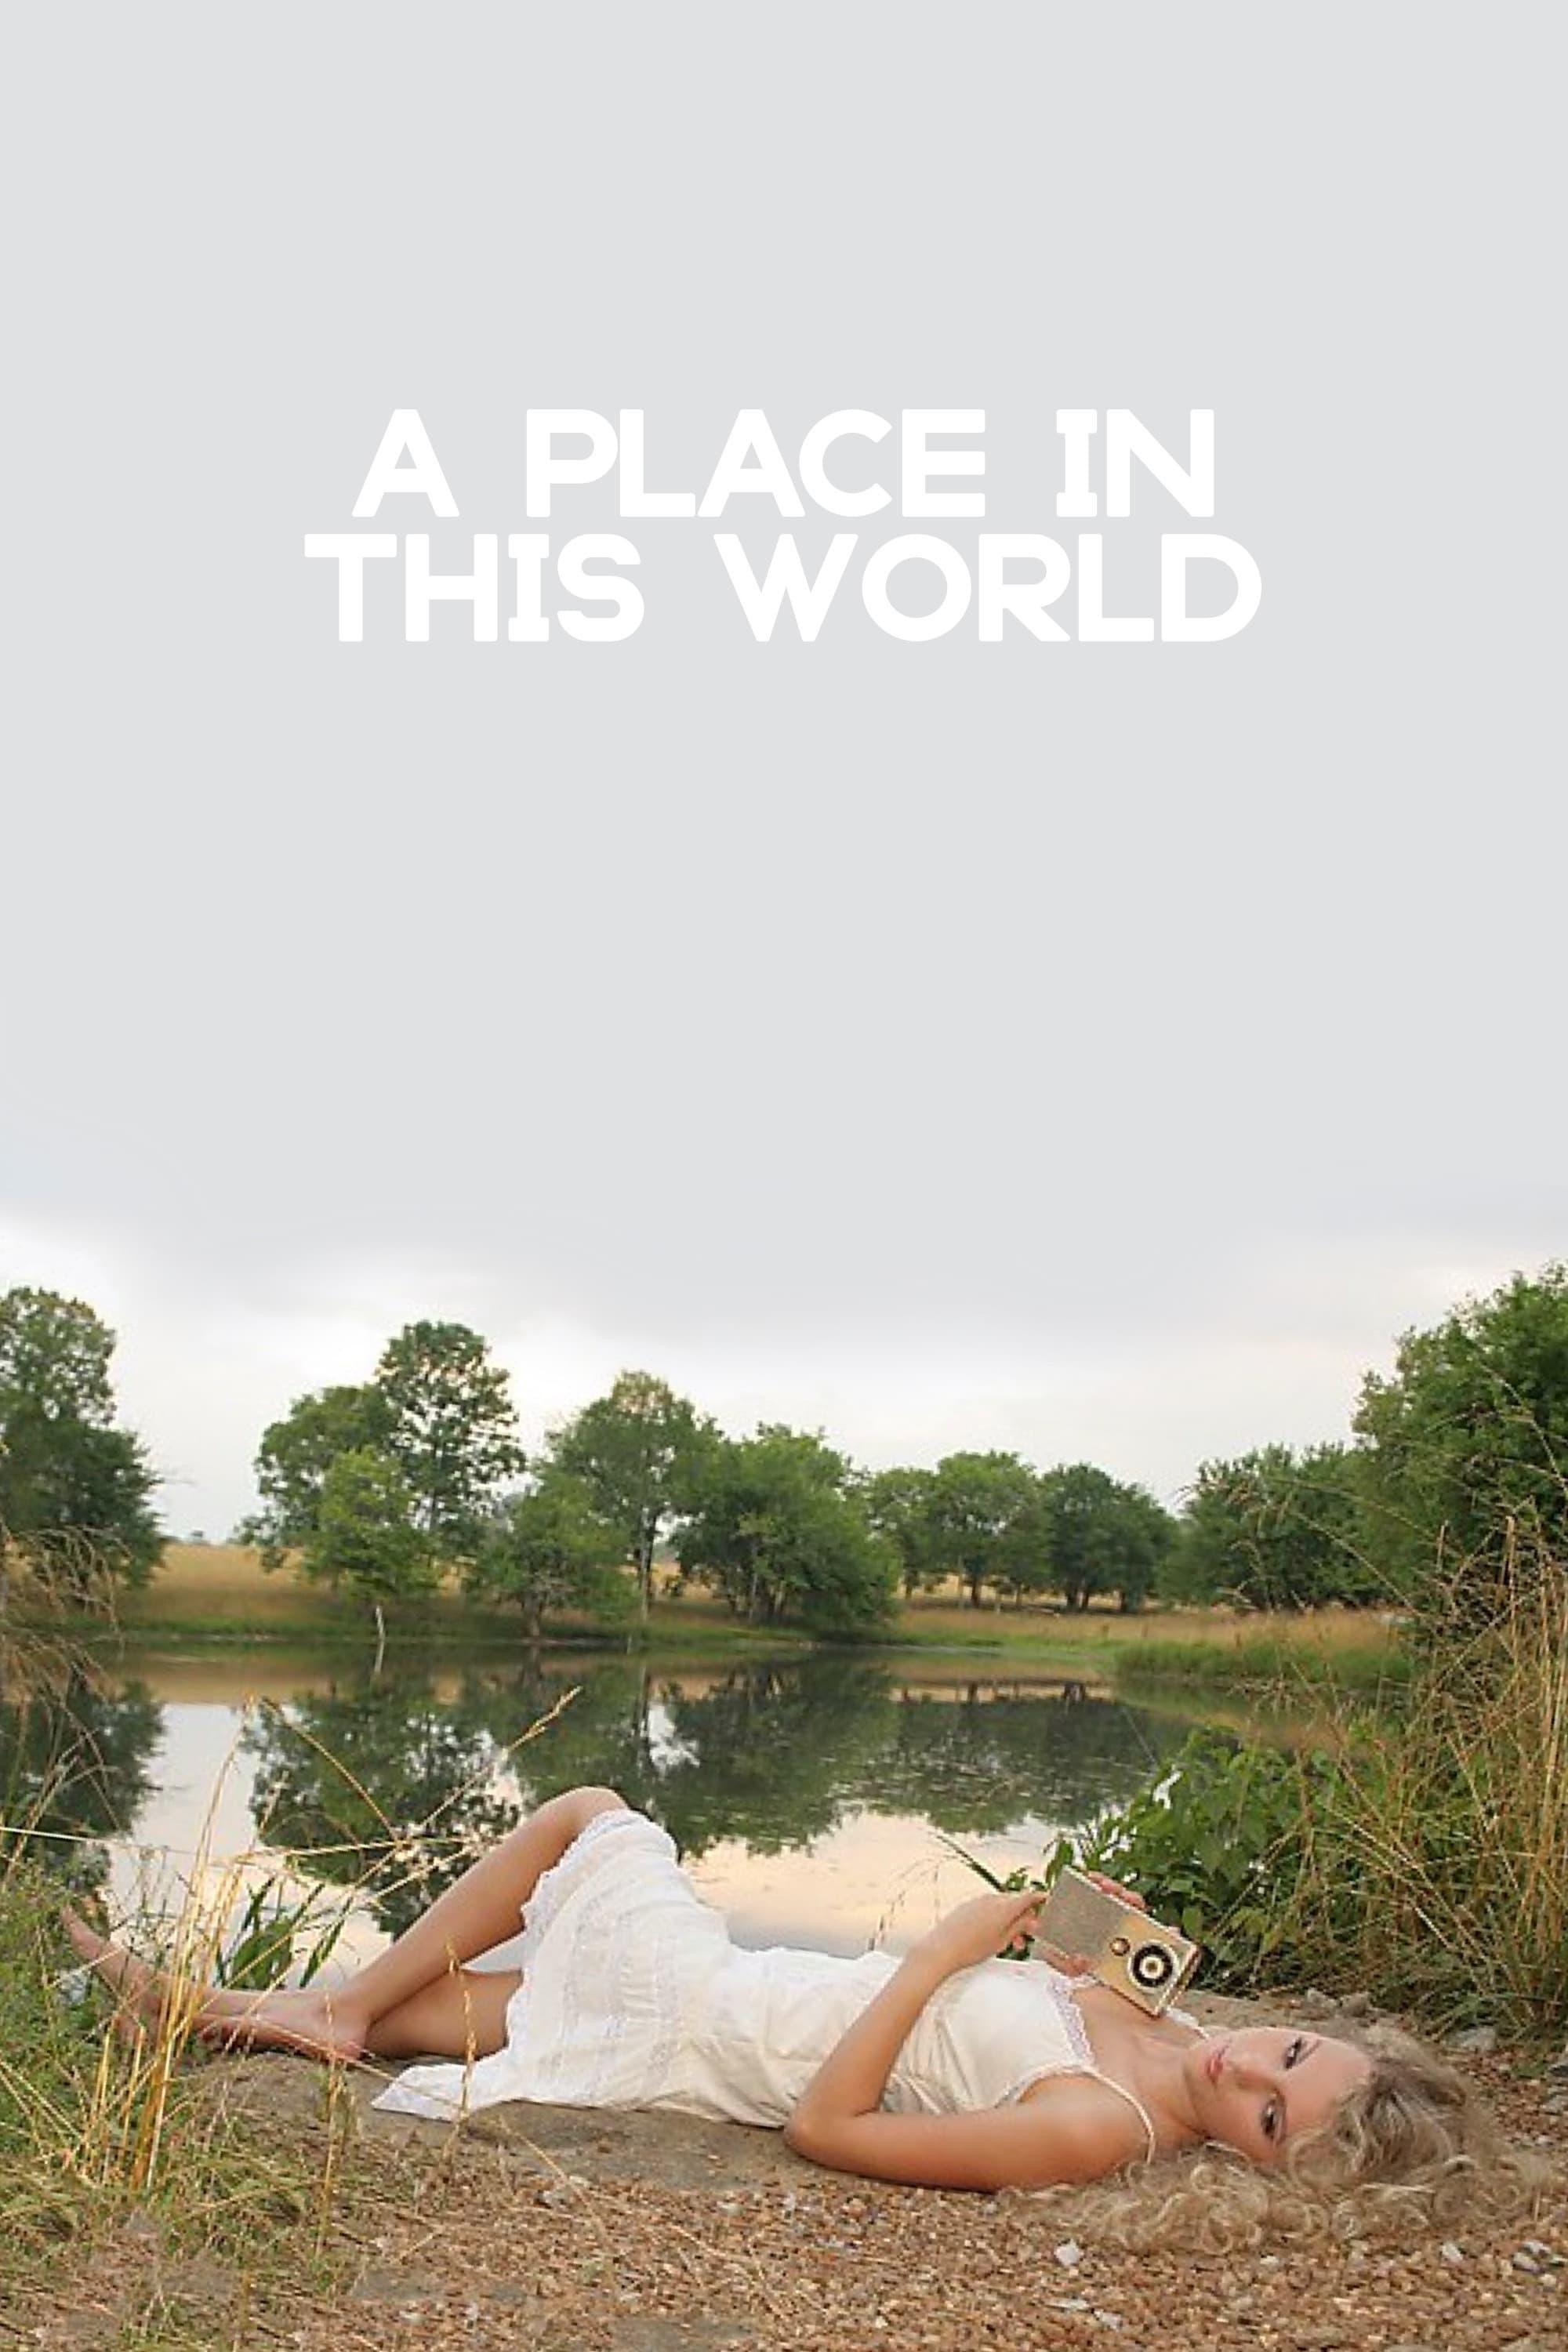 Taylor Swift: A Place in This World poster